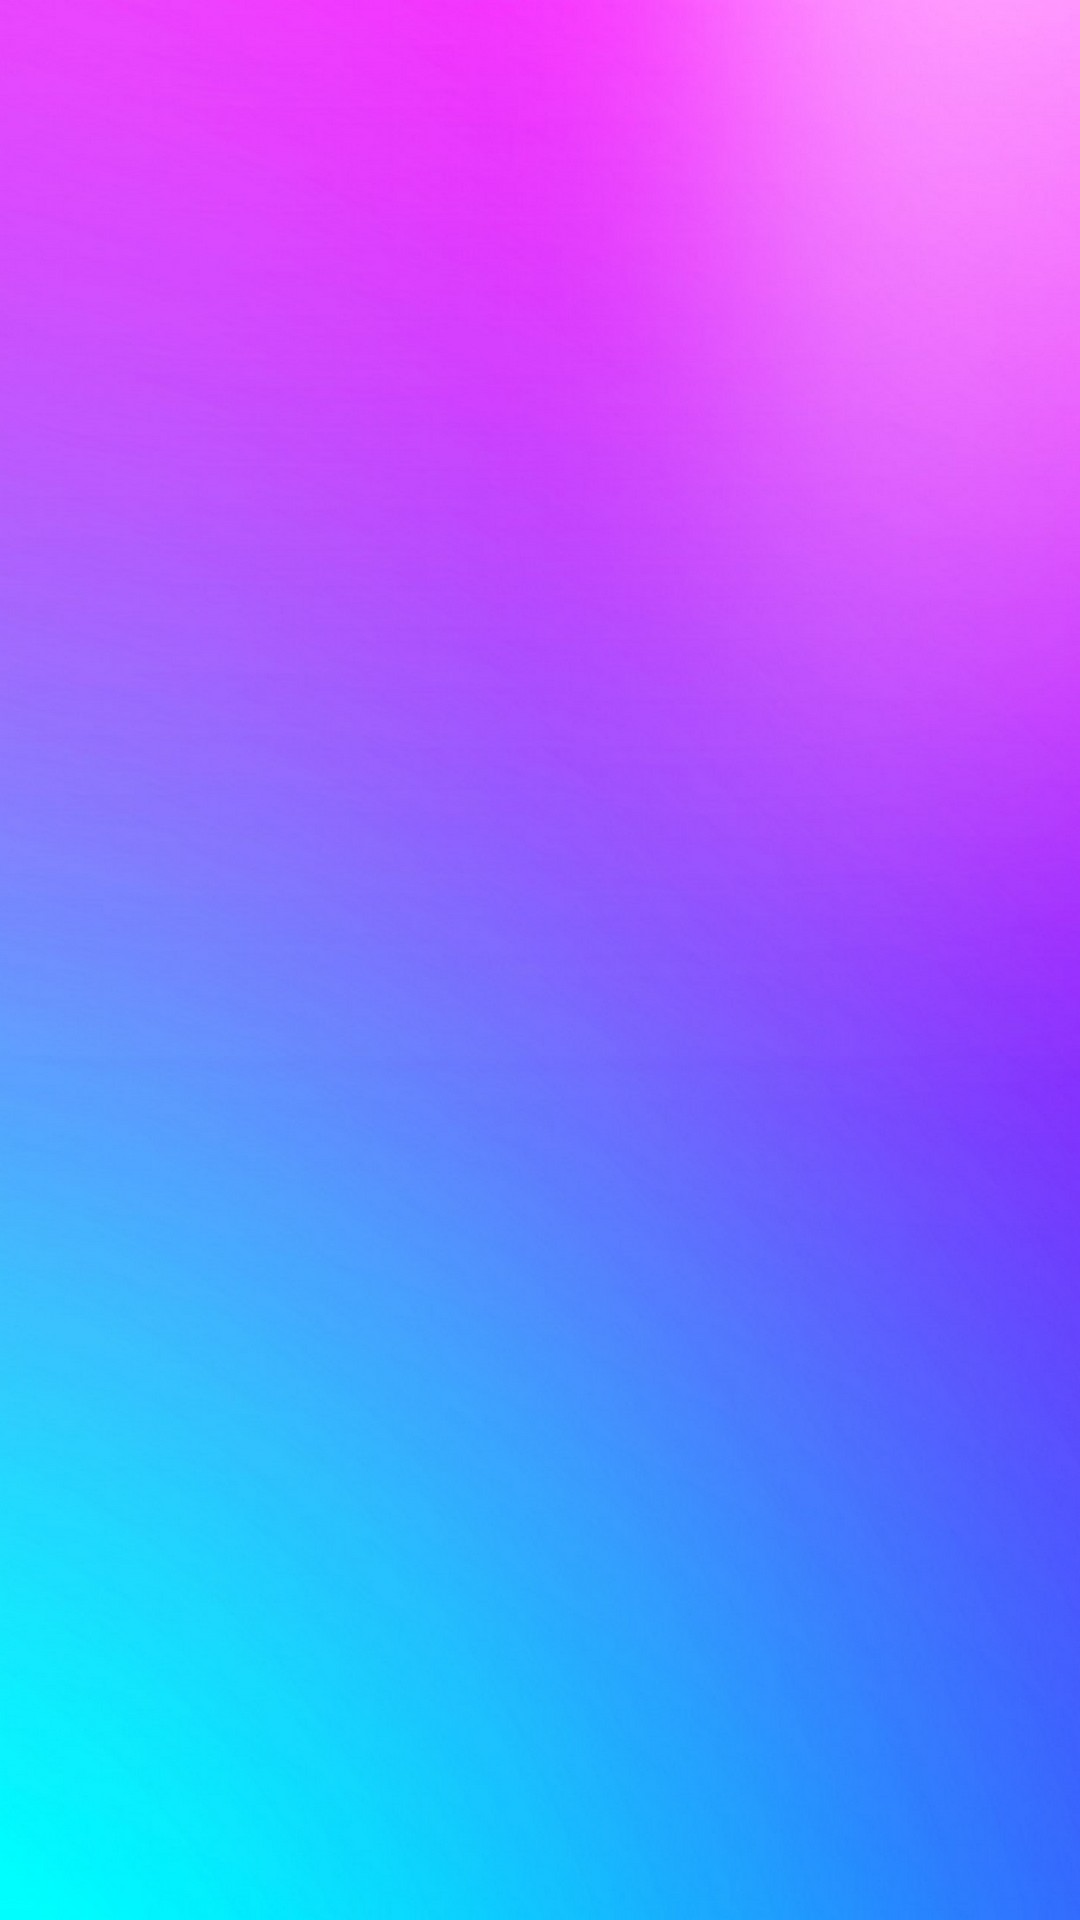 Wallpaper Gradient with high-resolution 1080x1920 pixel. You can use this wallpaper for your Windows and Mac OS computers as well as your Android and iPhone smartphones